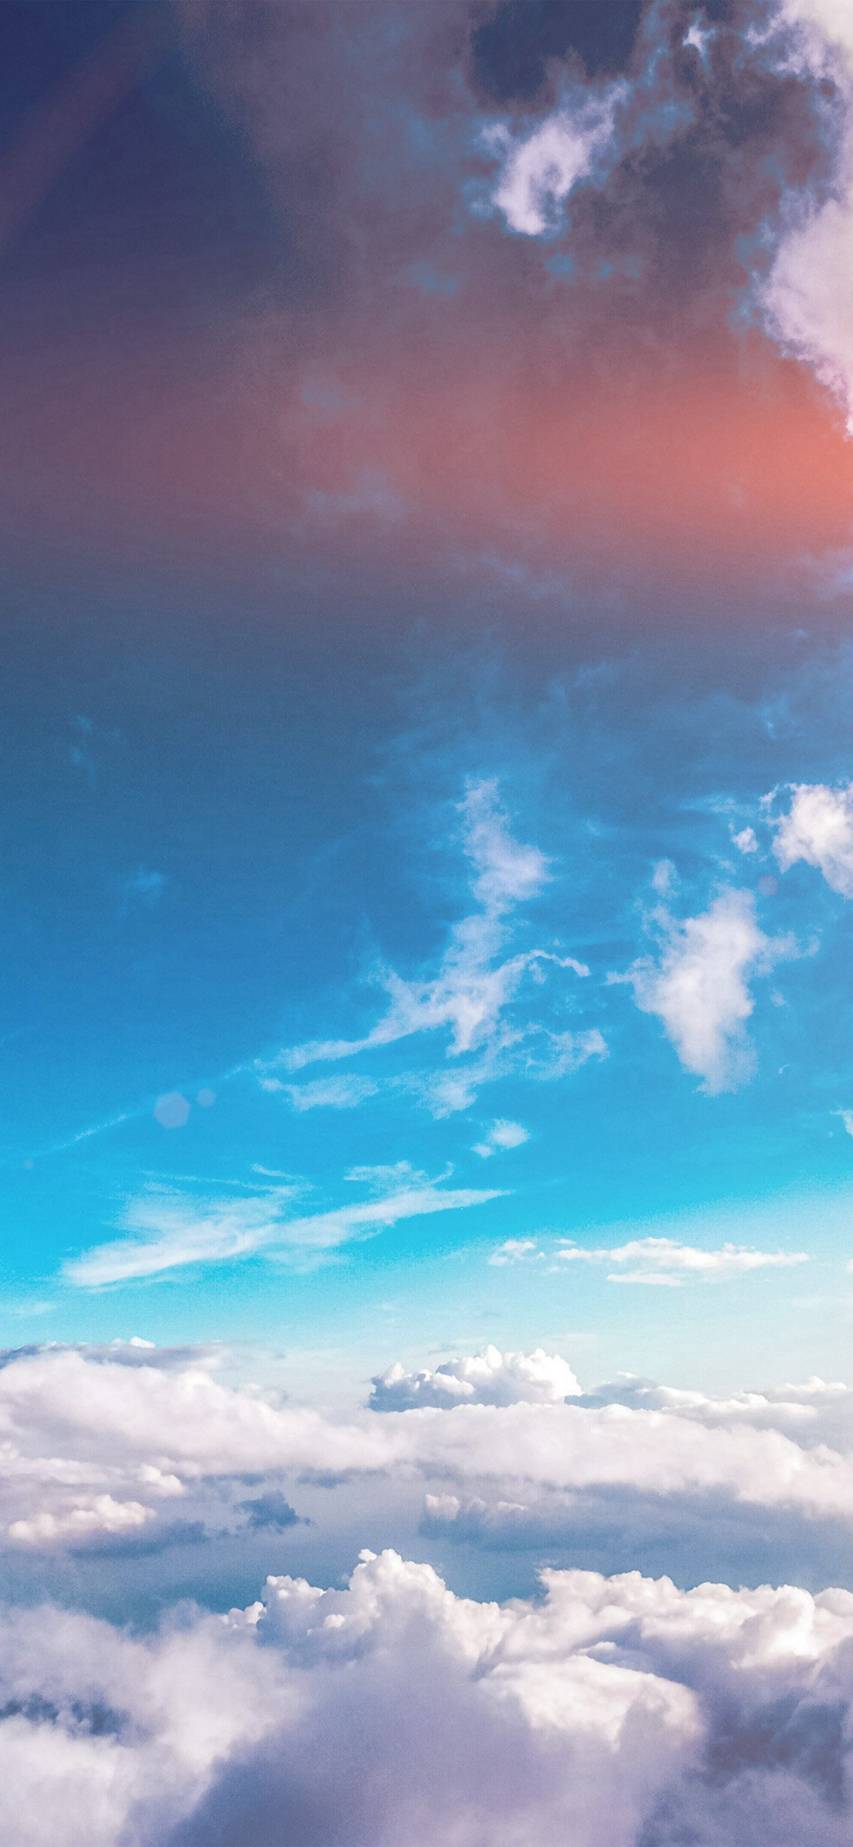 Best Aesthetic Clouds Background Wallpapers for iPhone